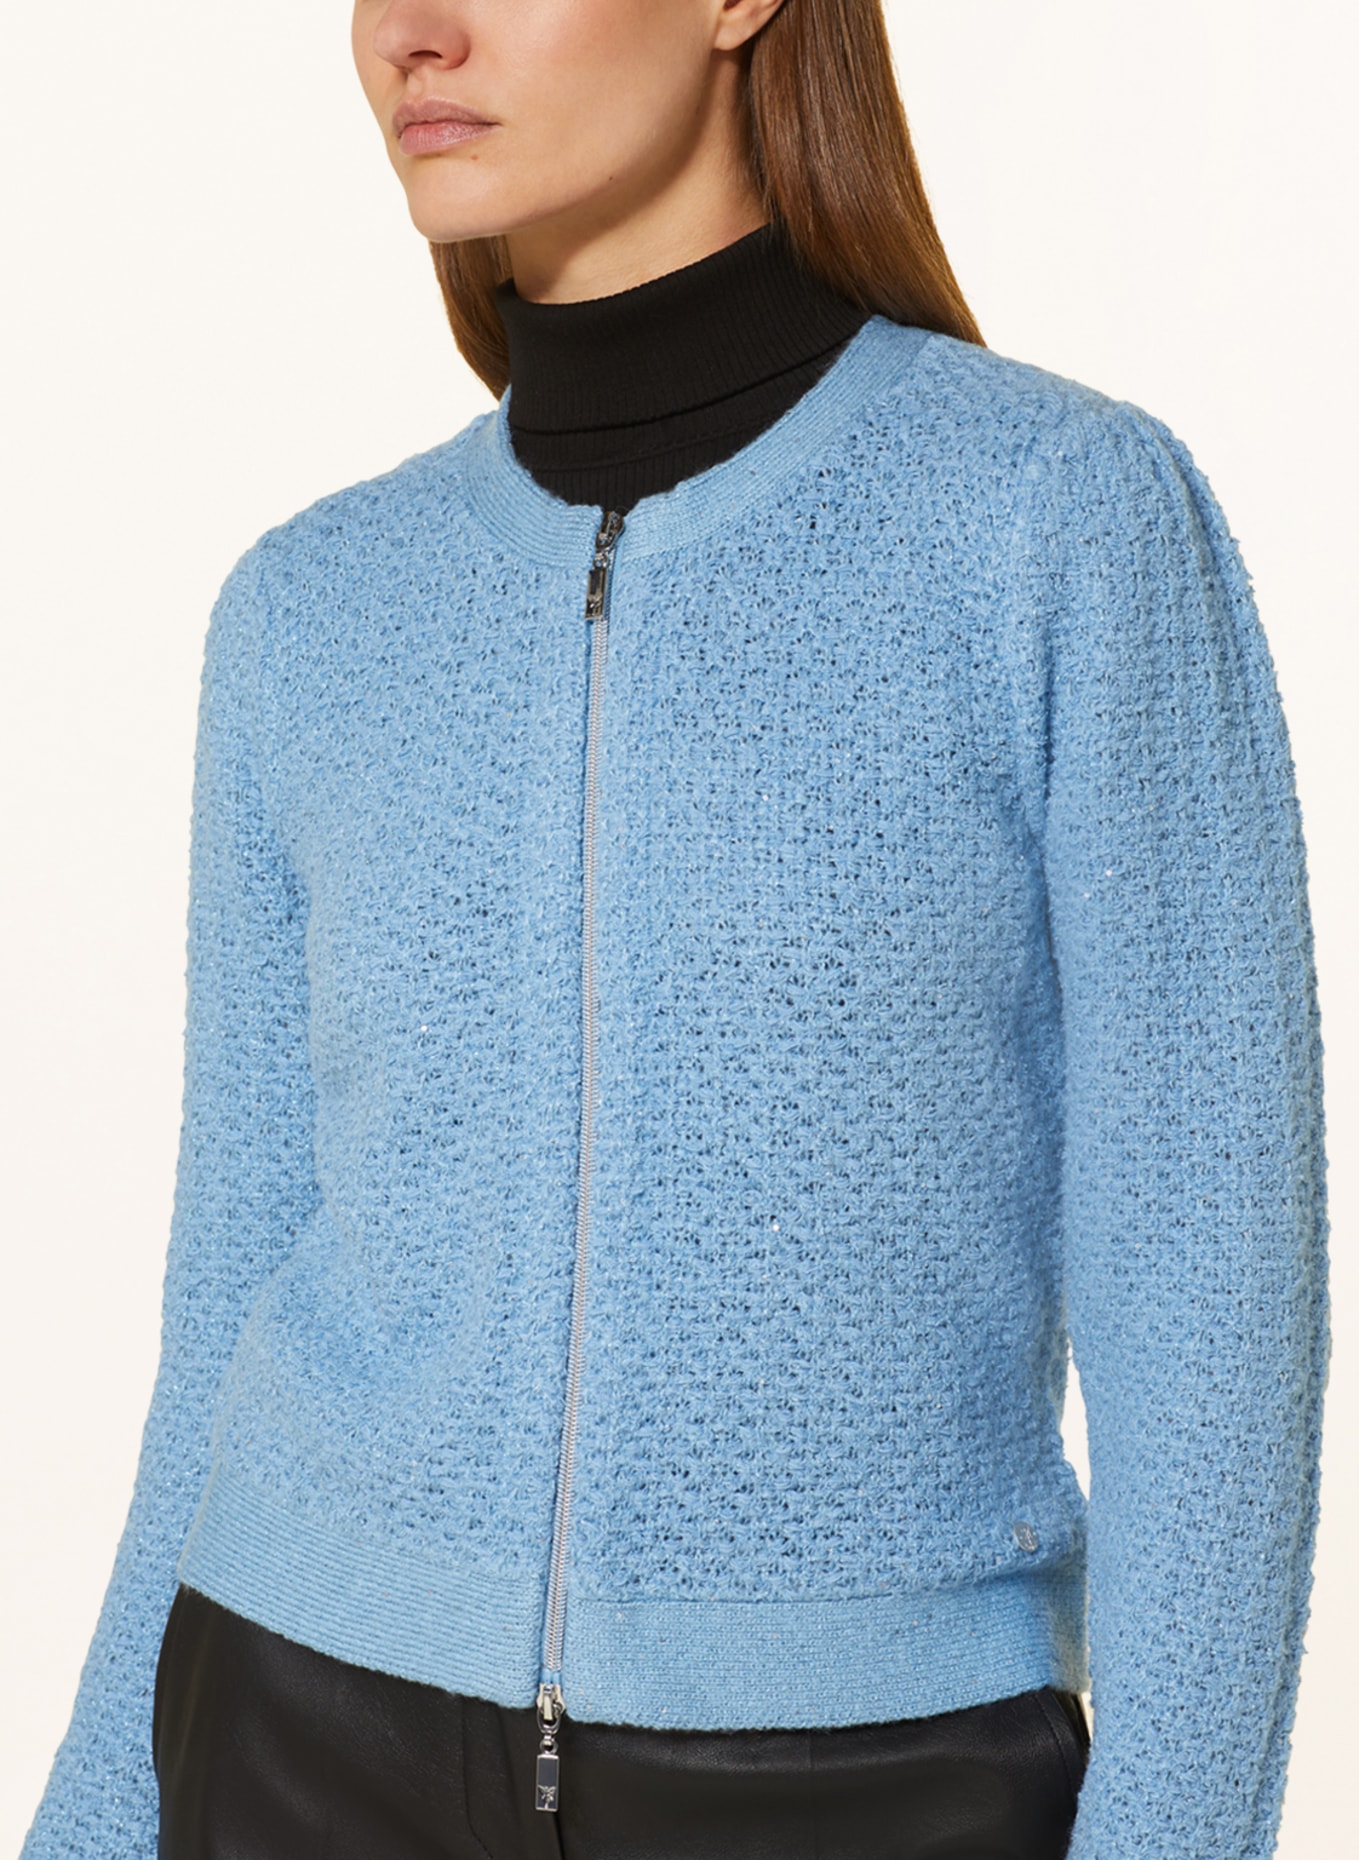 monari Cardigan with glitter thread and Sequins, Color: LIGHT BLUE (Image 4)